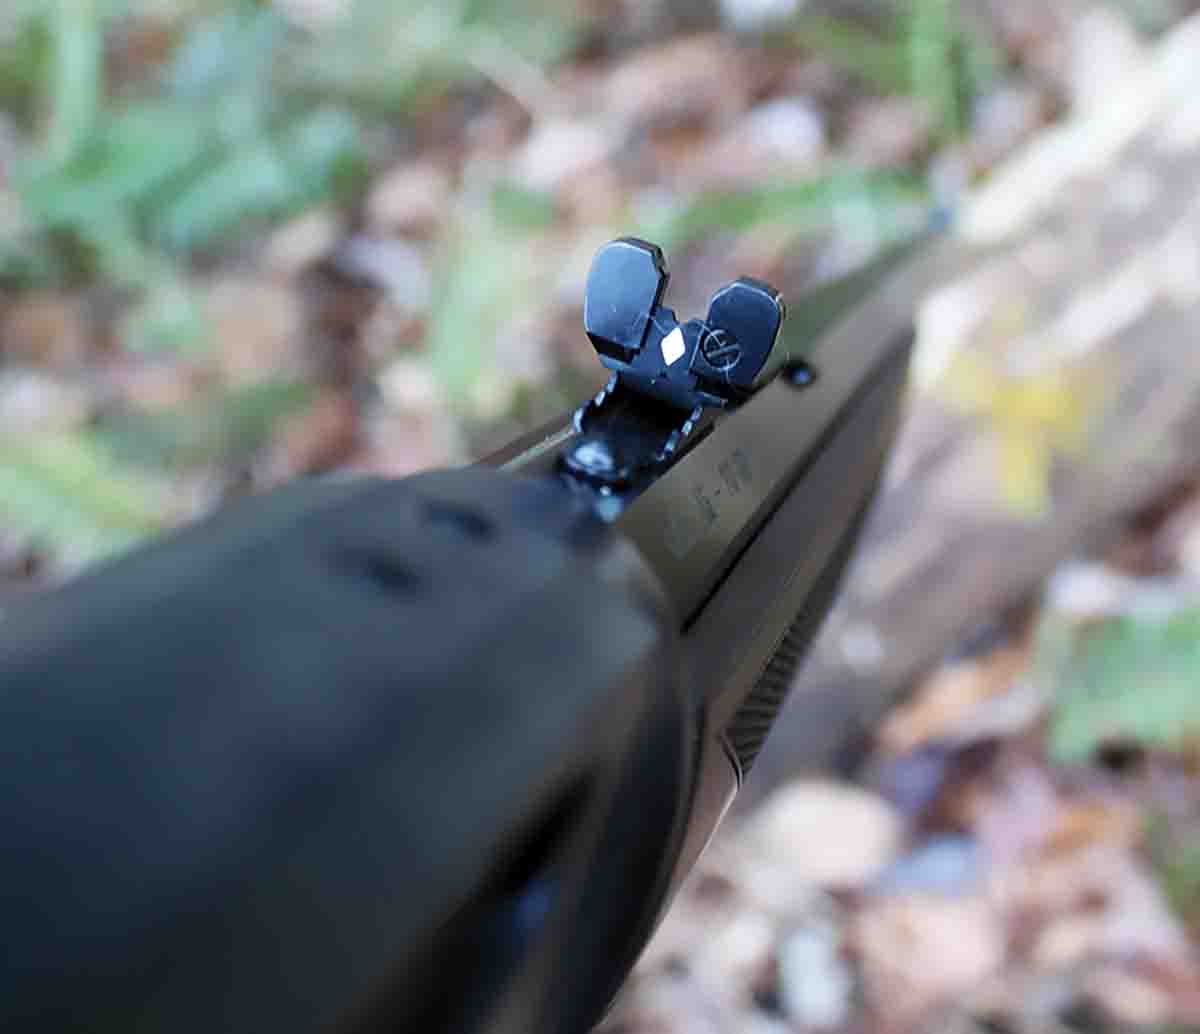 The rear sight is the classic semi-buckhorn with notch and diamond insert. The front sight is a gold bead.